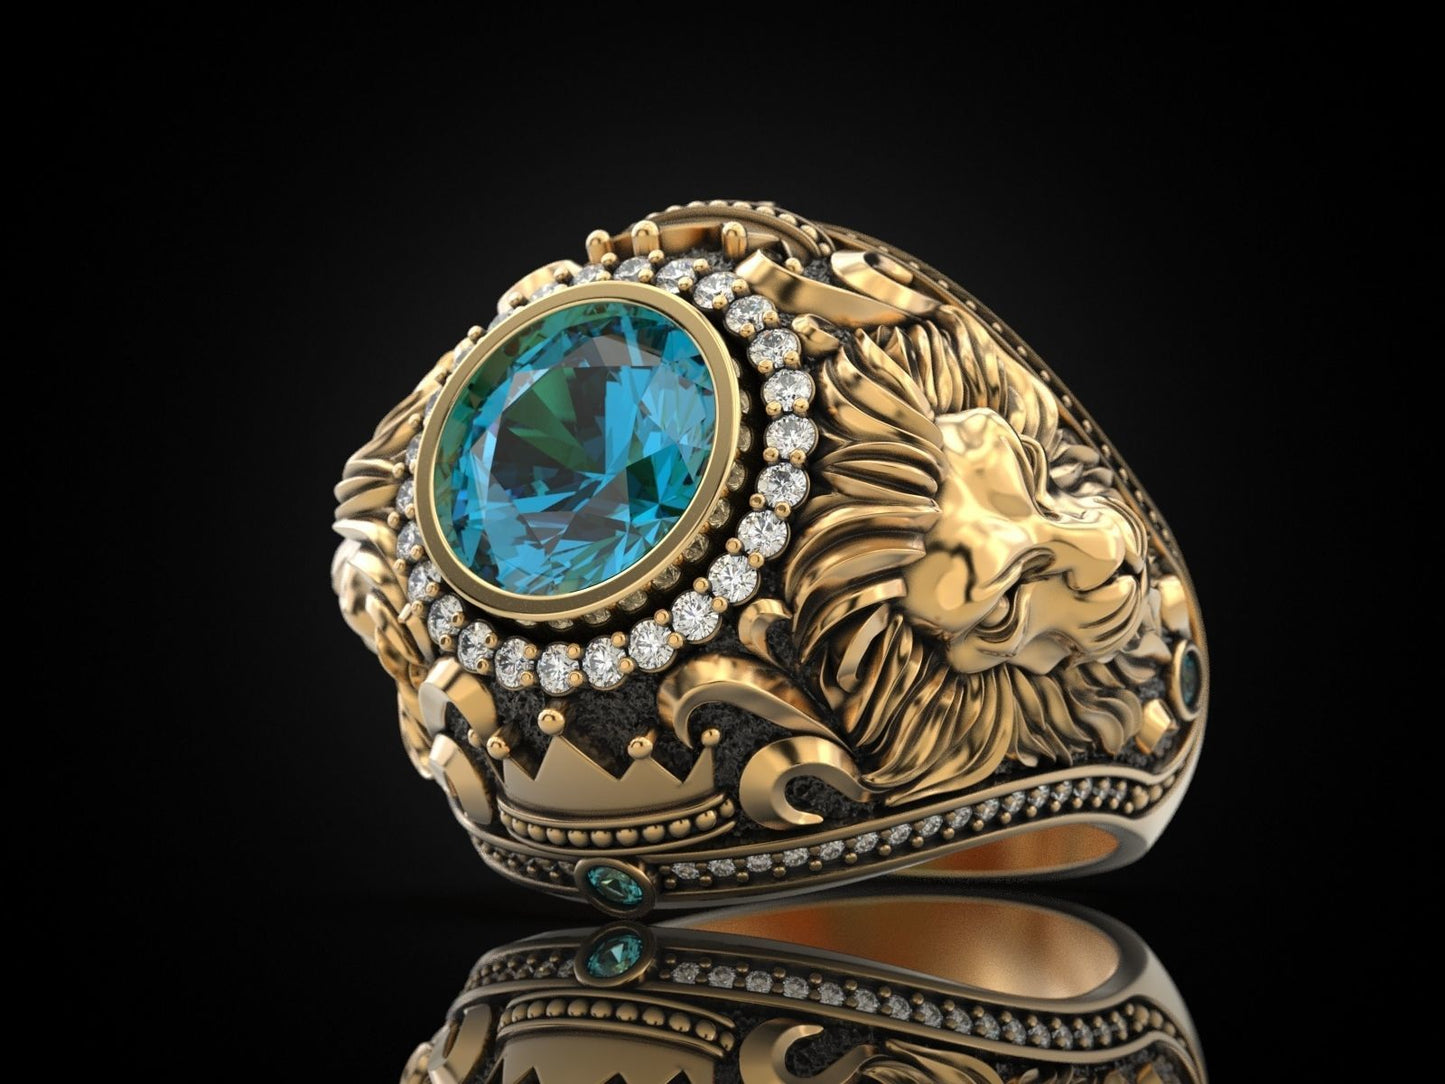 RARE PRINCE by CARAT SUTRA | Unique Designed 22k Gold plated Double Faced Lion Ring with Green Zircon Stone | 925 Sterling Silver Oxidized Ring | Men's Jewelry | With Certificate of Authenticity and 925 Hallmark